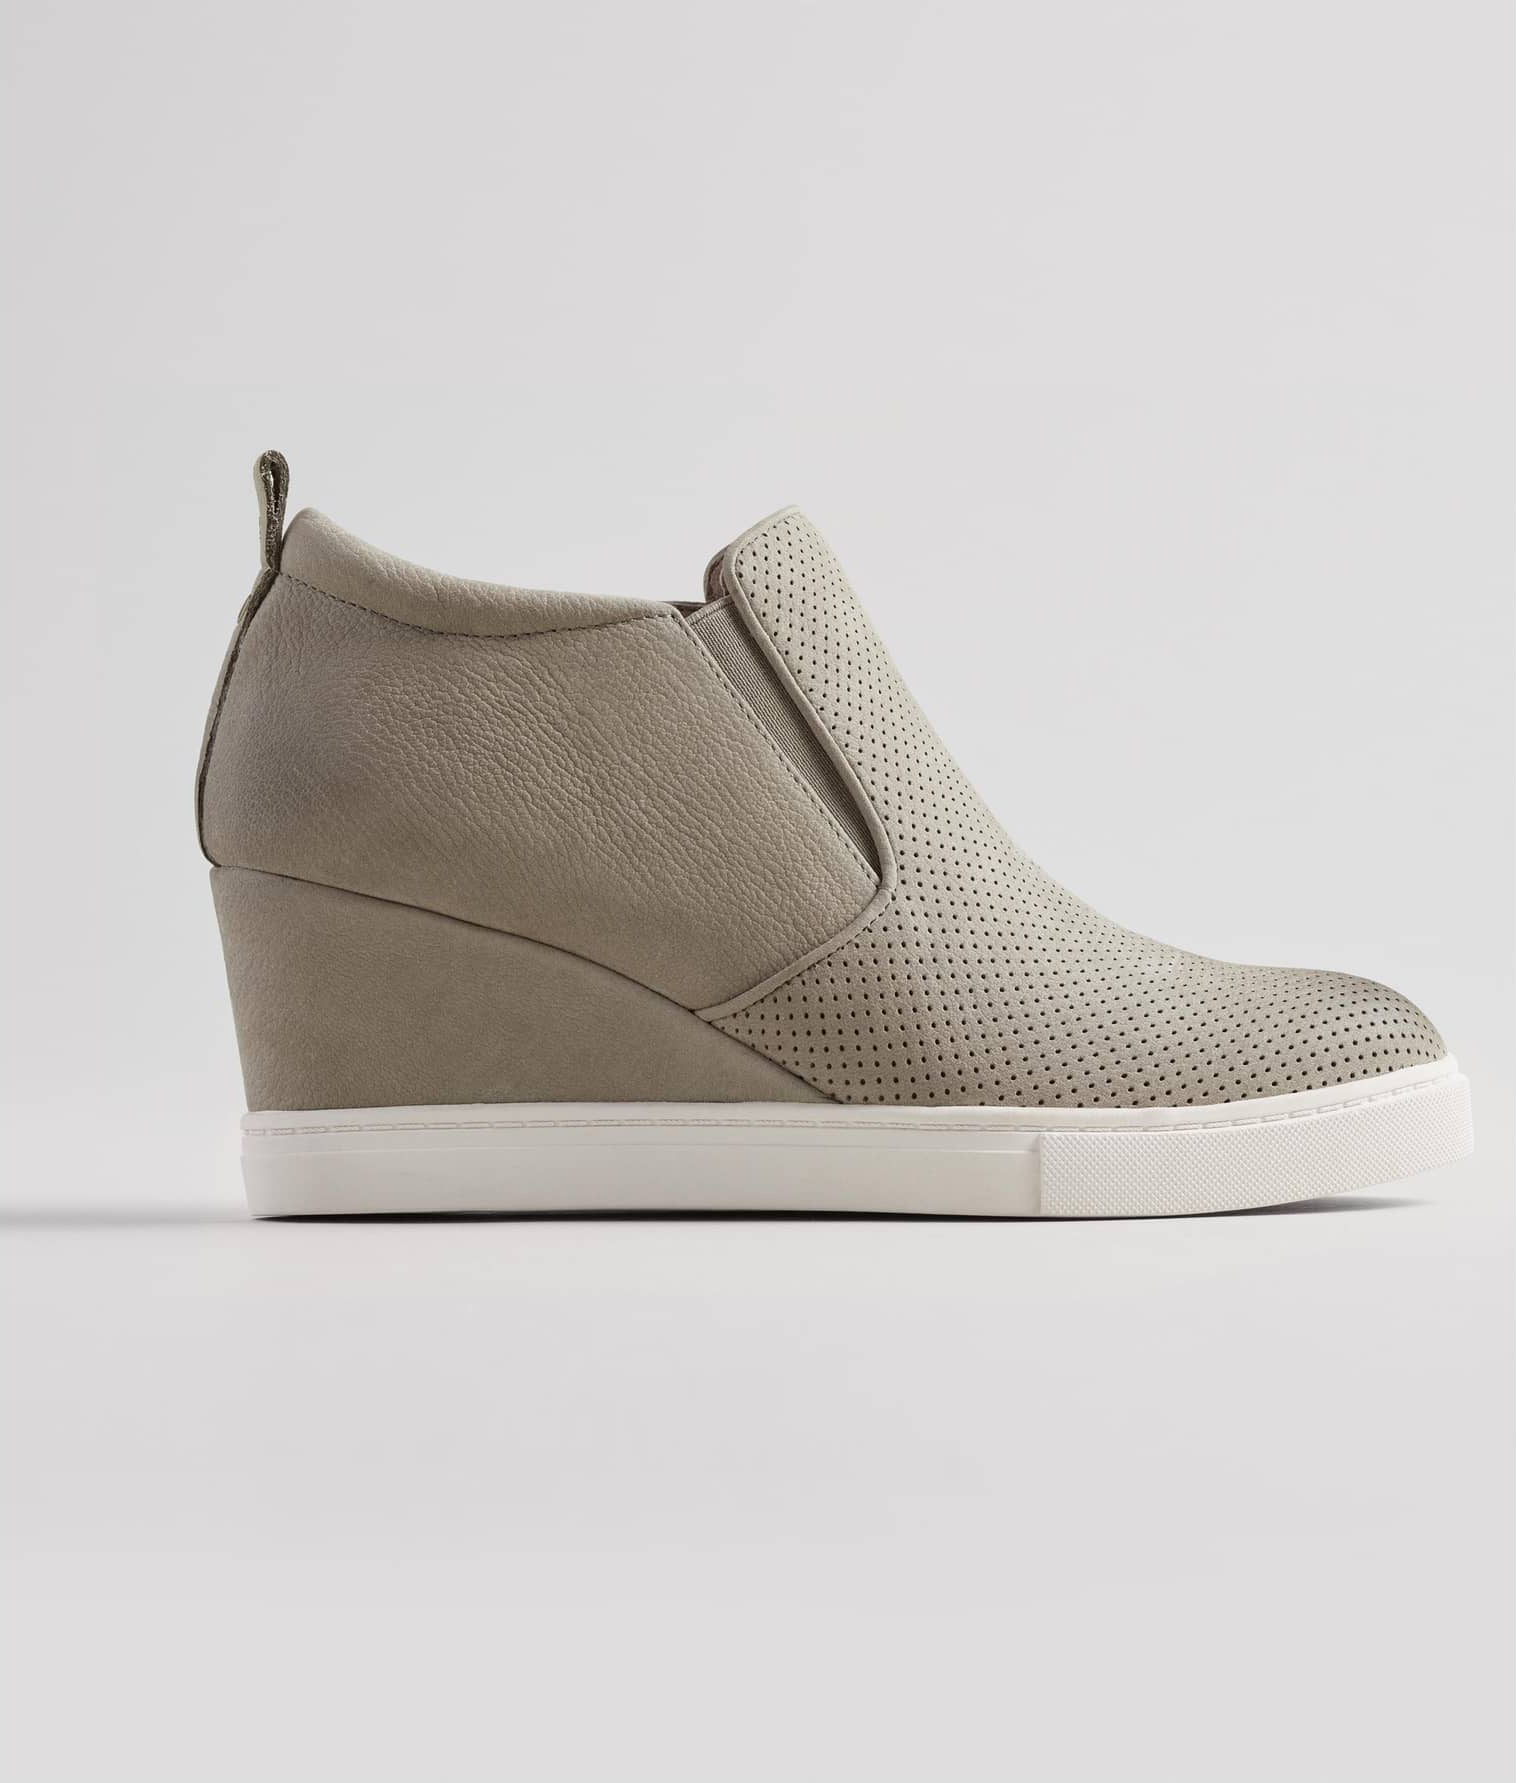 Shop These Sporty Wedge Sneakers at 